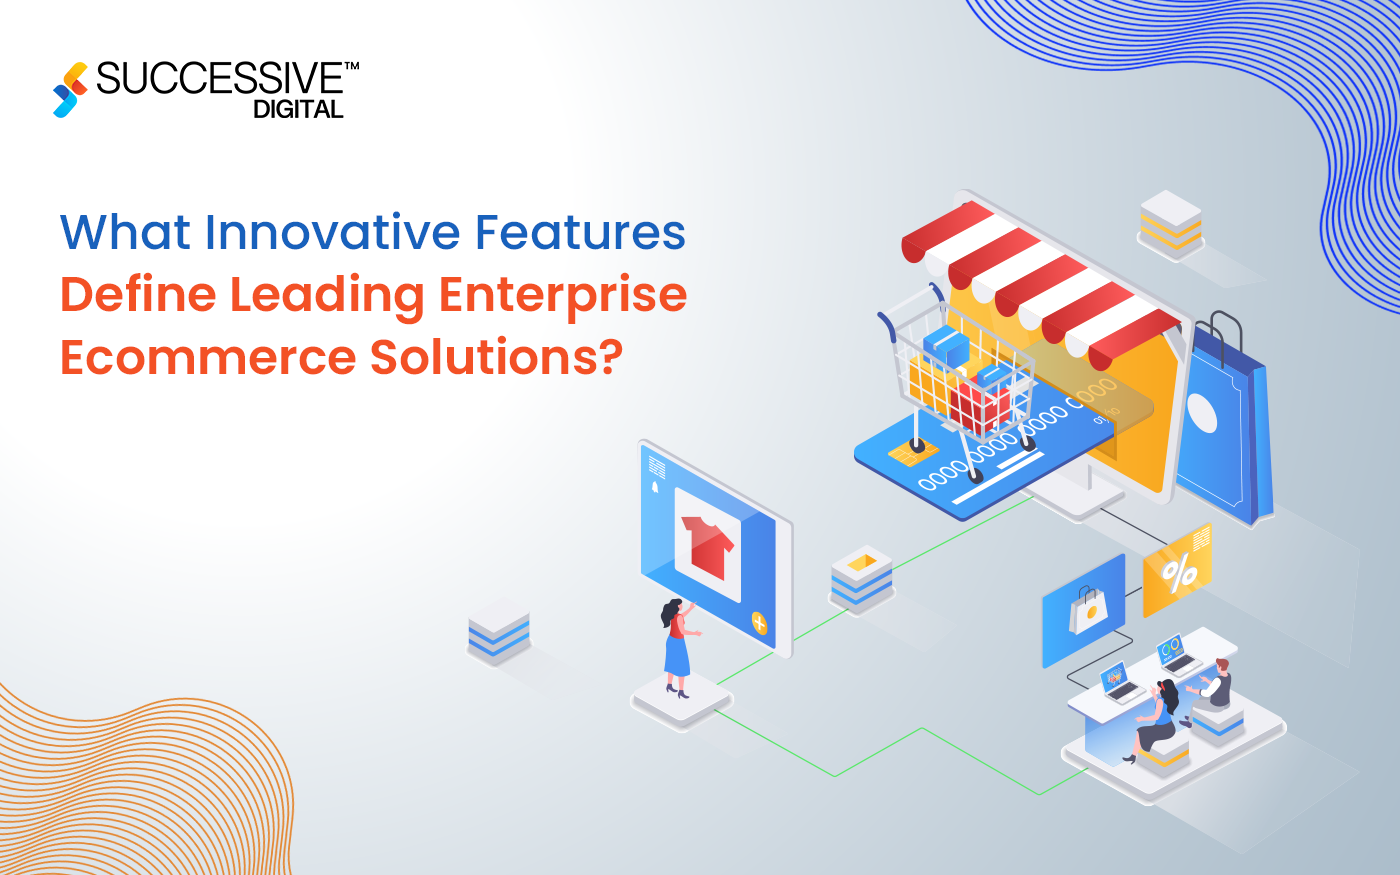 What Innovative Features Define Leading Enterprise Ecommerce Solutions?